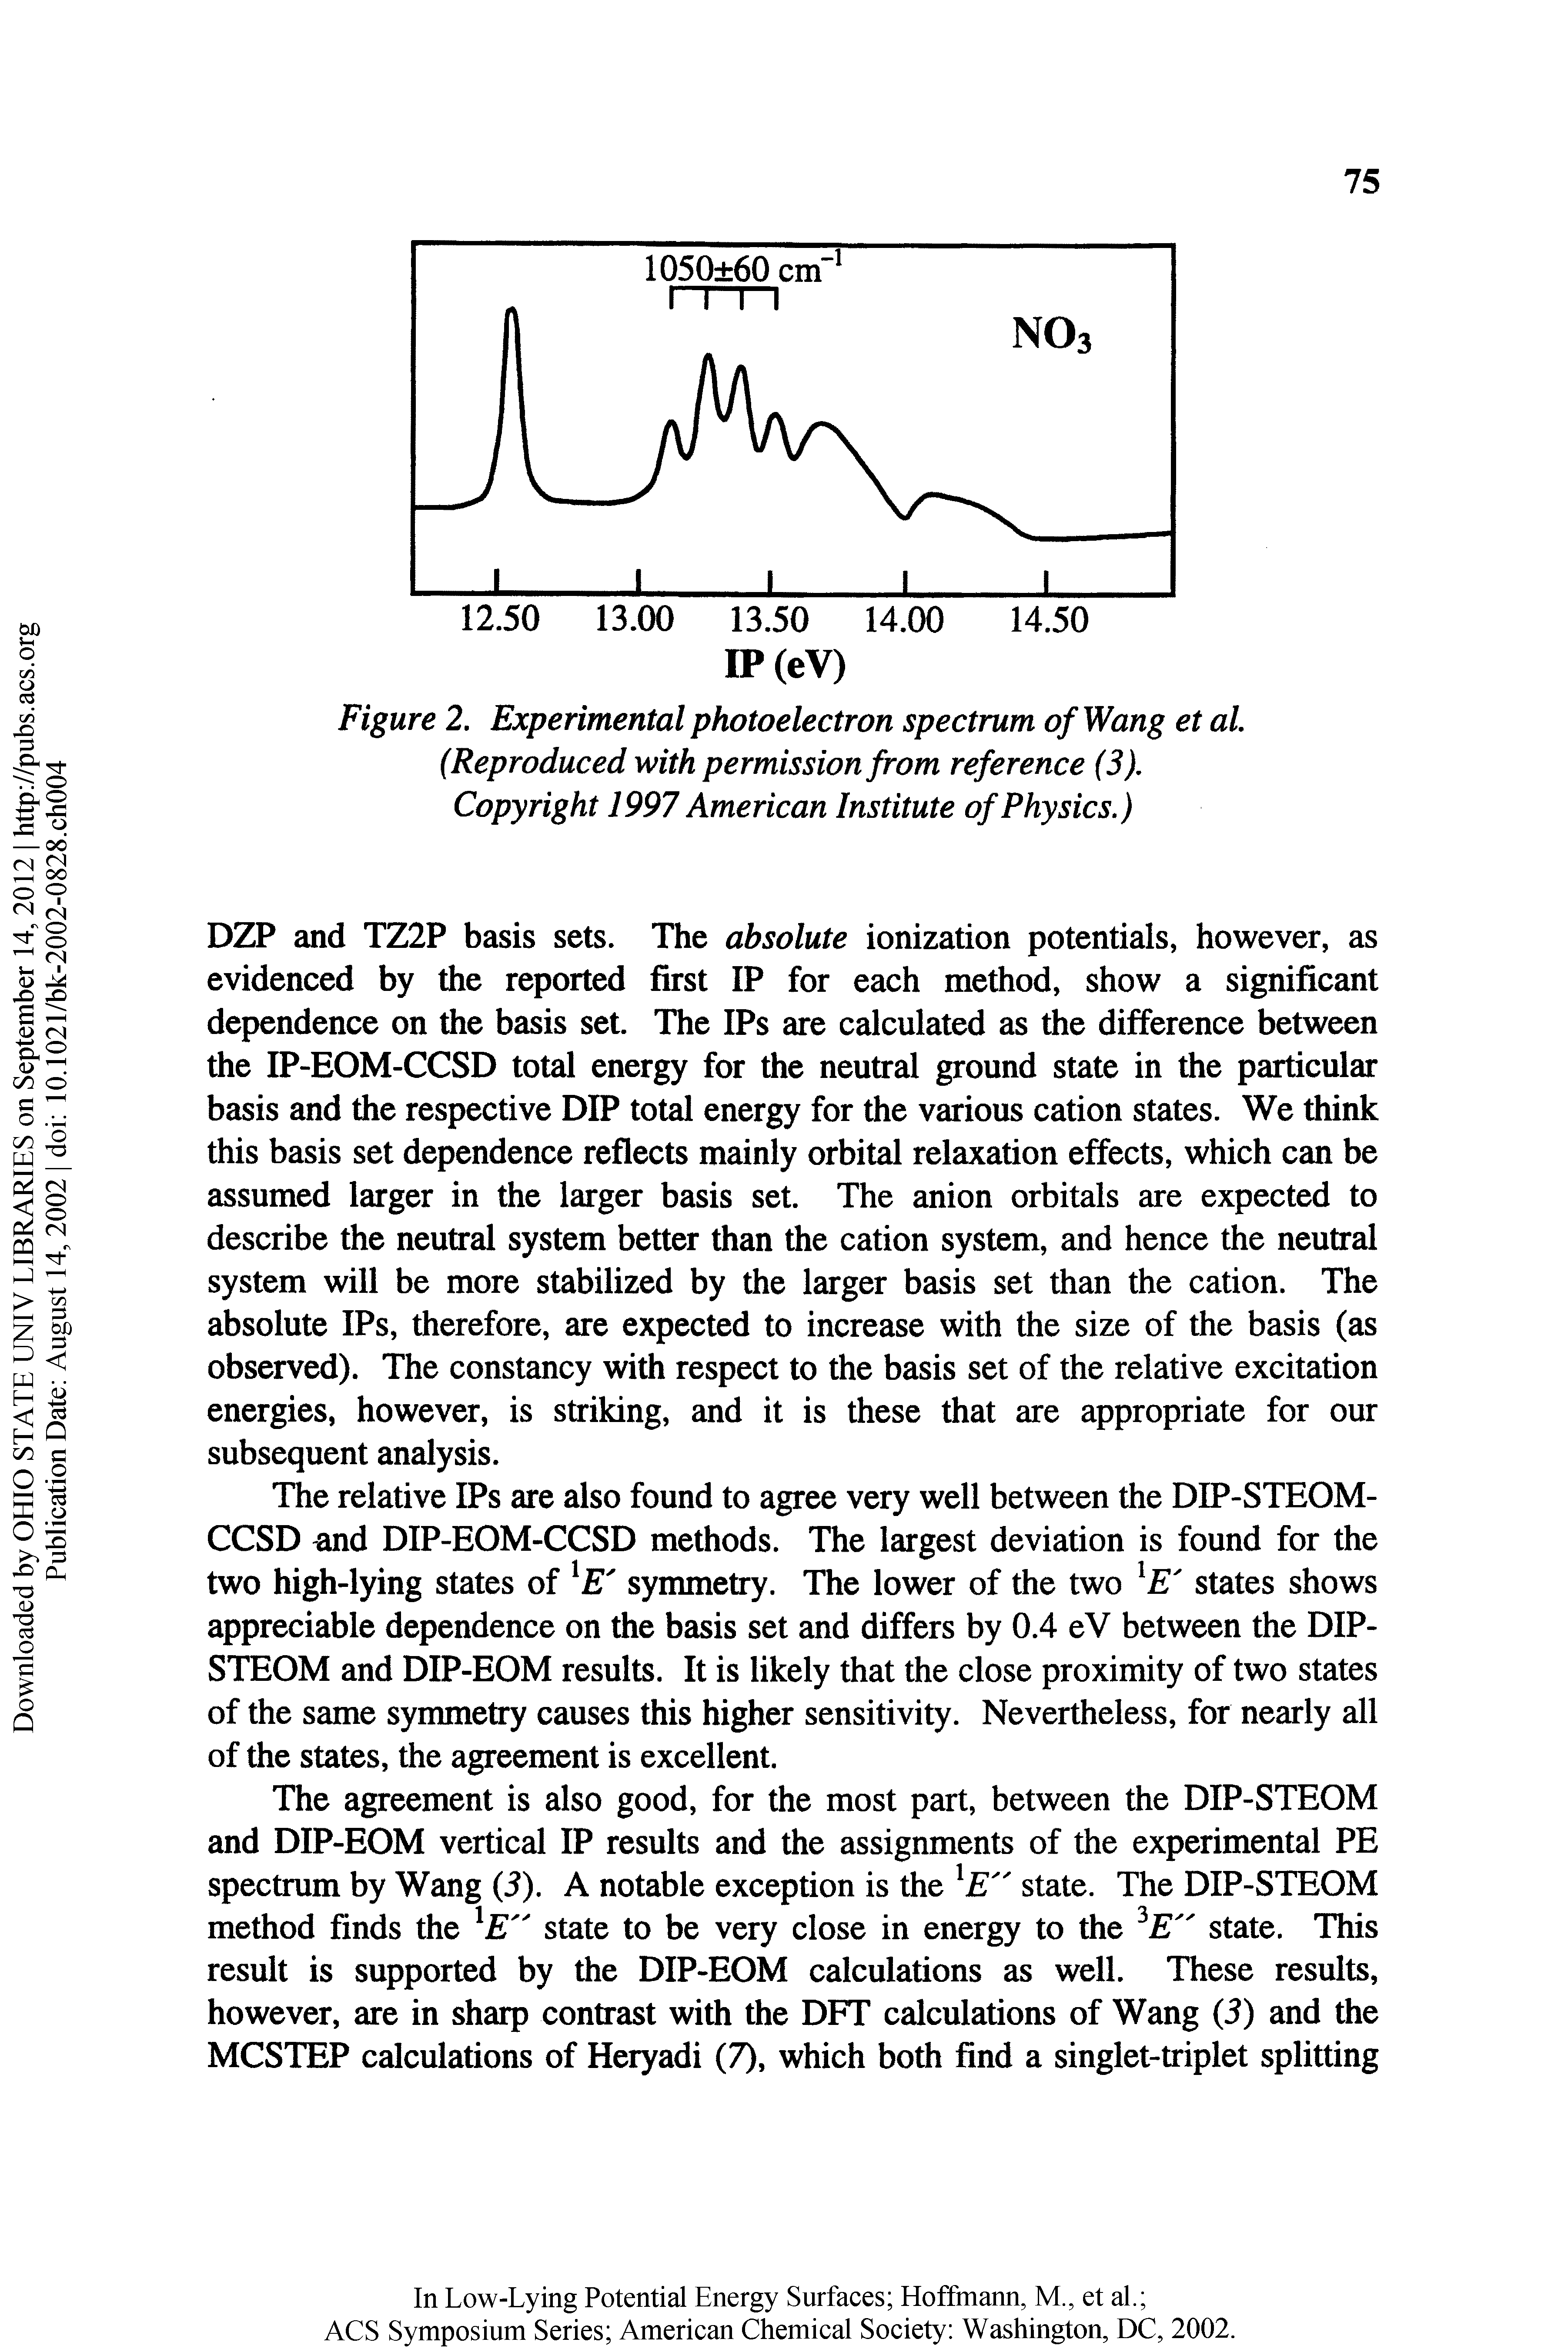 Figure 2. Experimental photoelectron spectrum of Wang et al (Reproduced with permission from reference (3), Copyright 1997 American Institute of Physics.)...